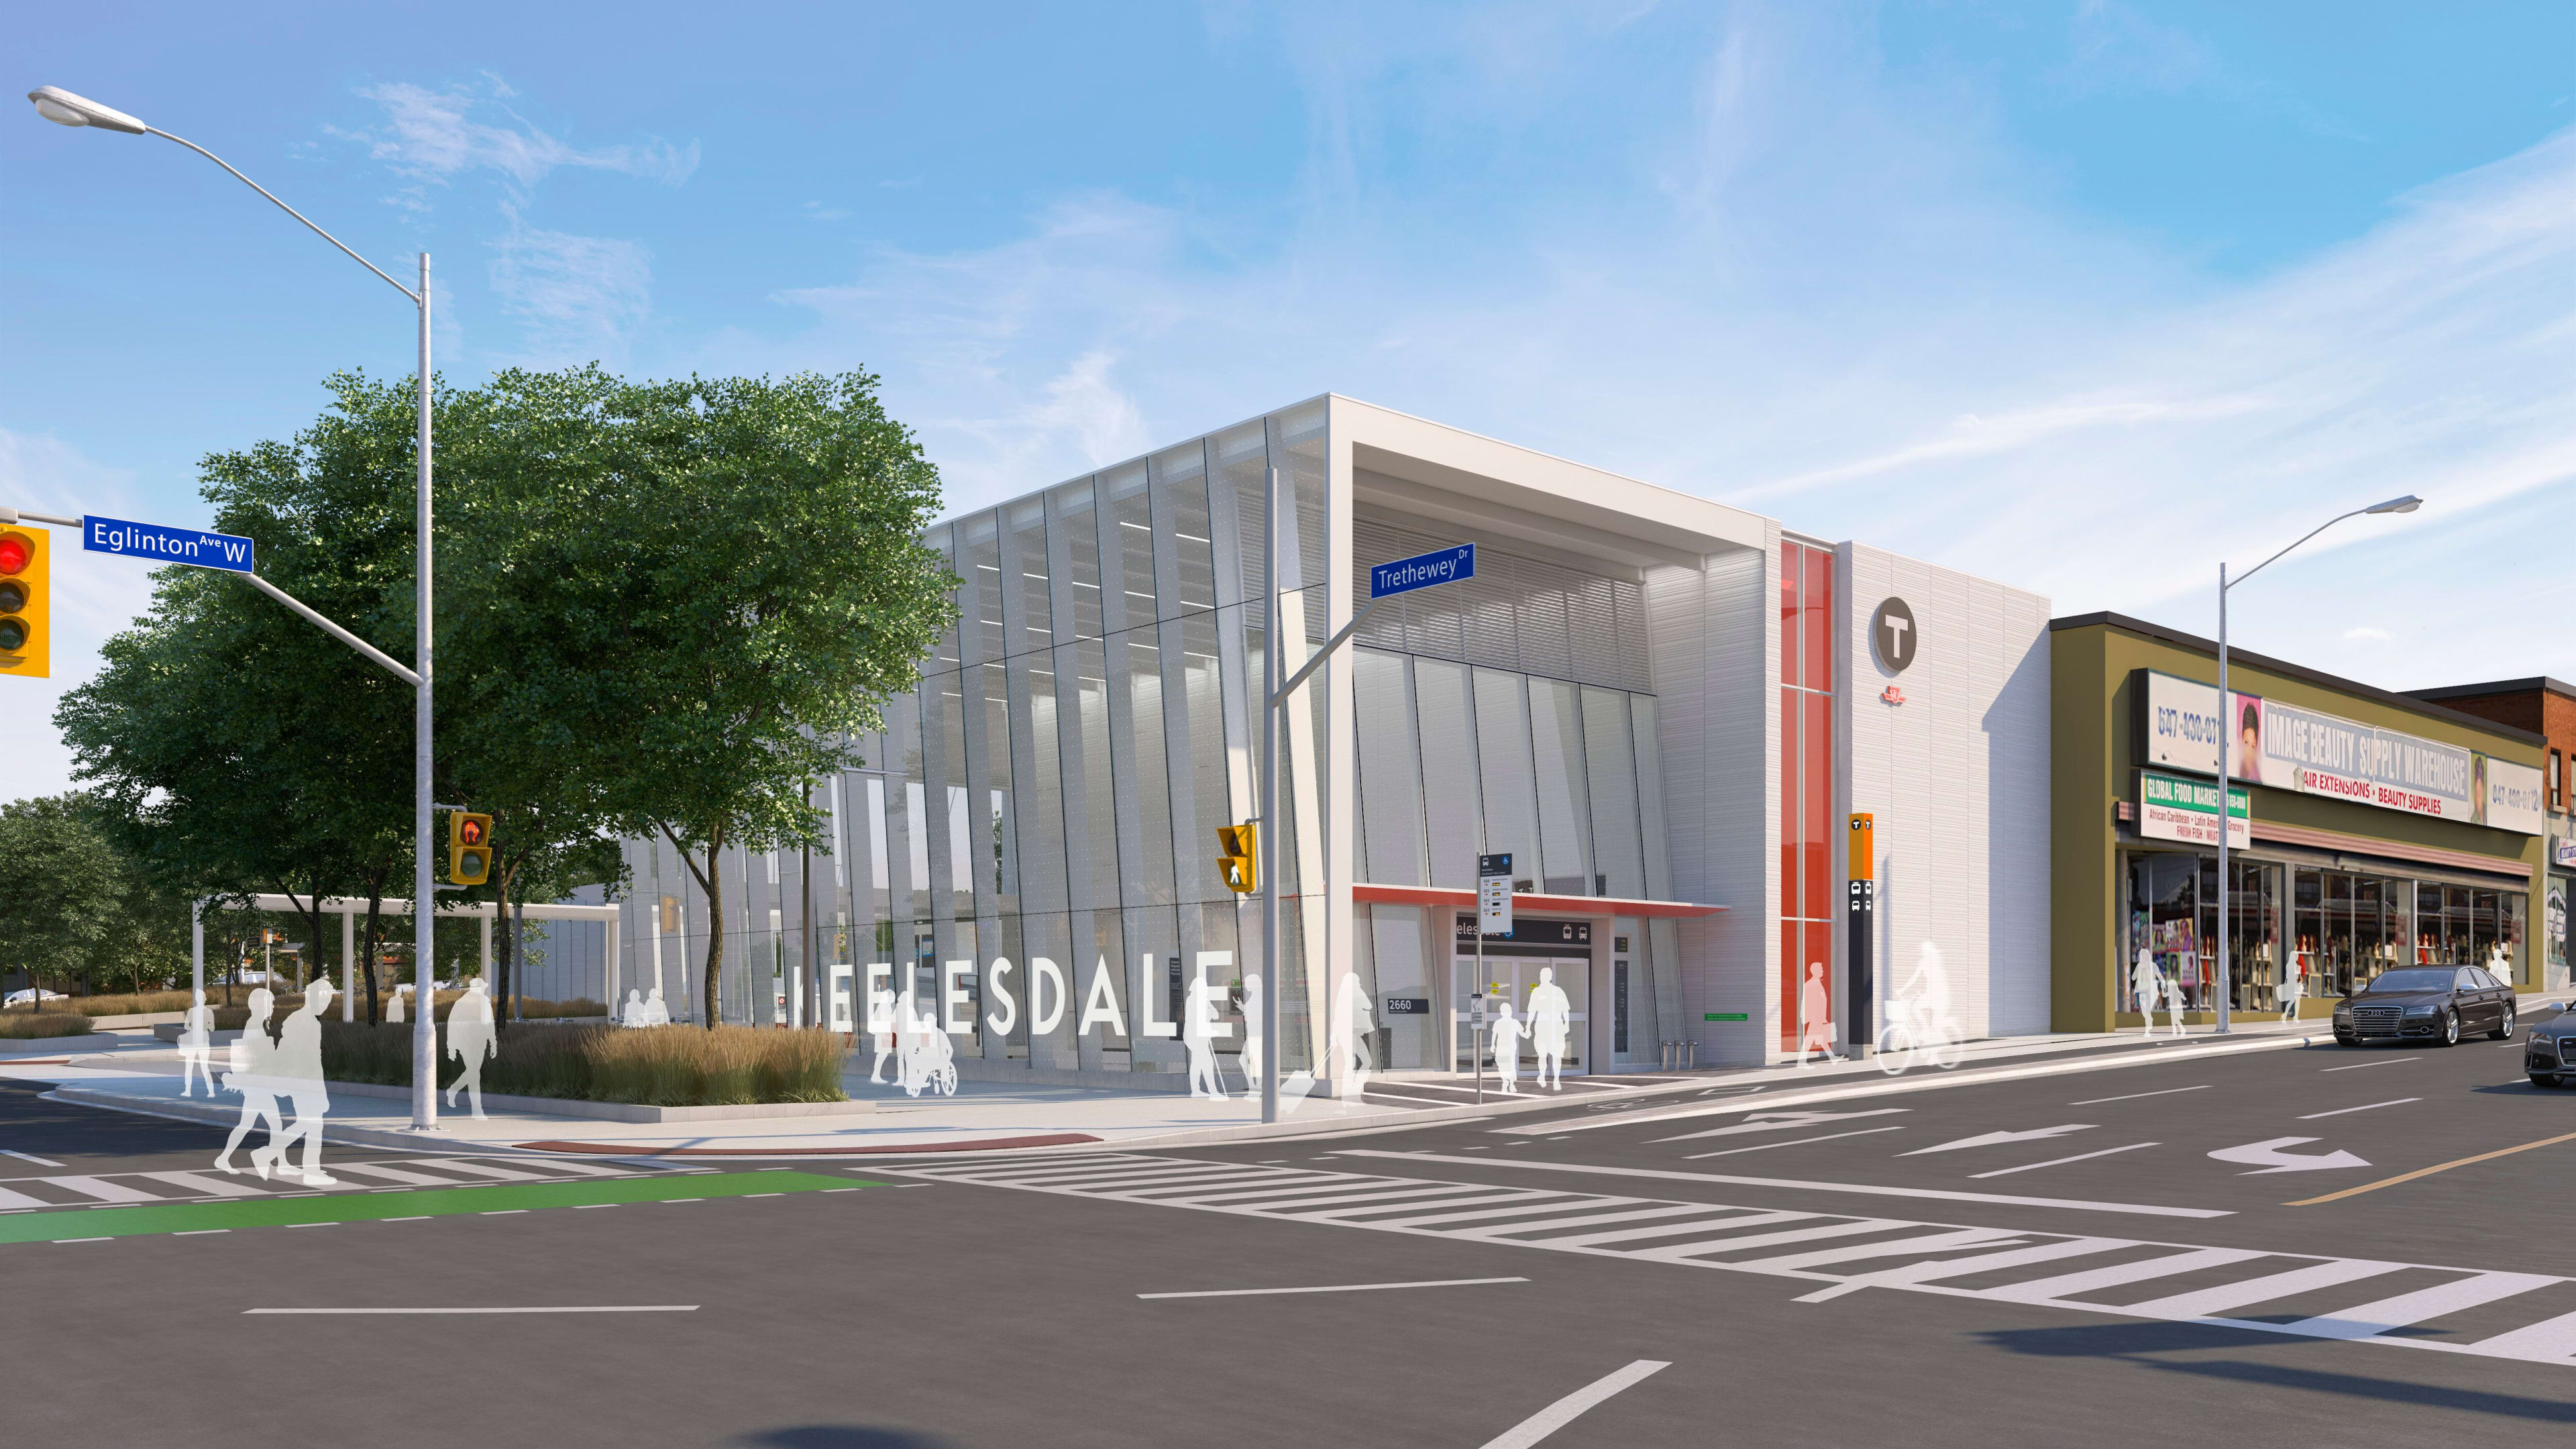 In an artist's rendering, the Keelesdale station is largely white, and build with a great deal of...